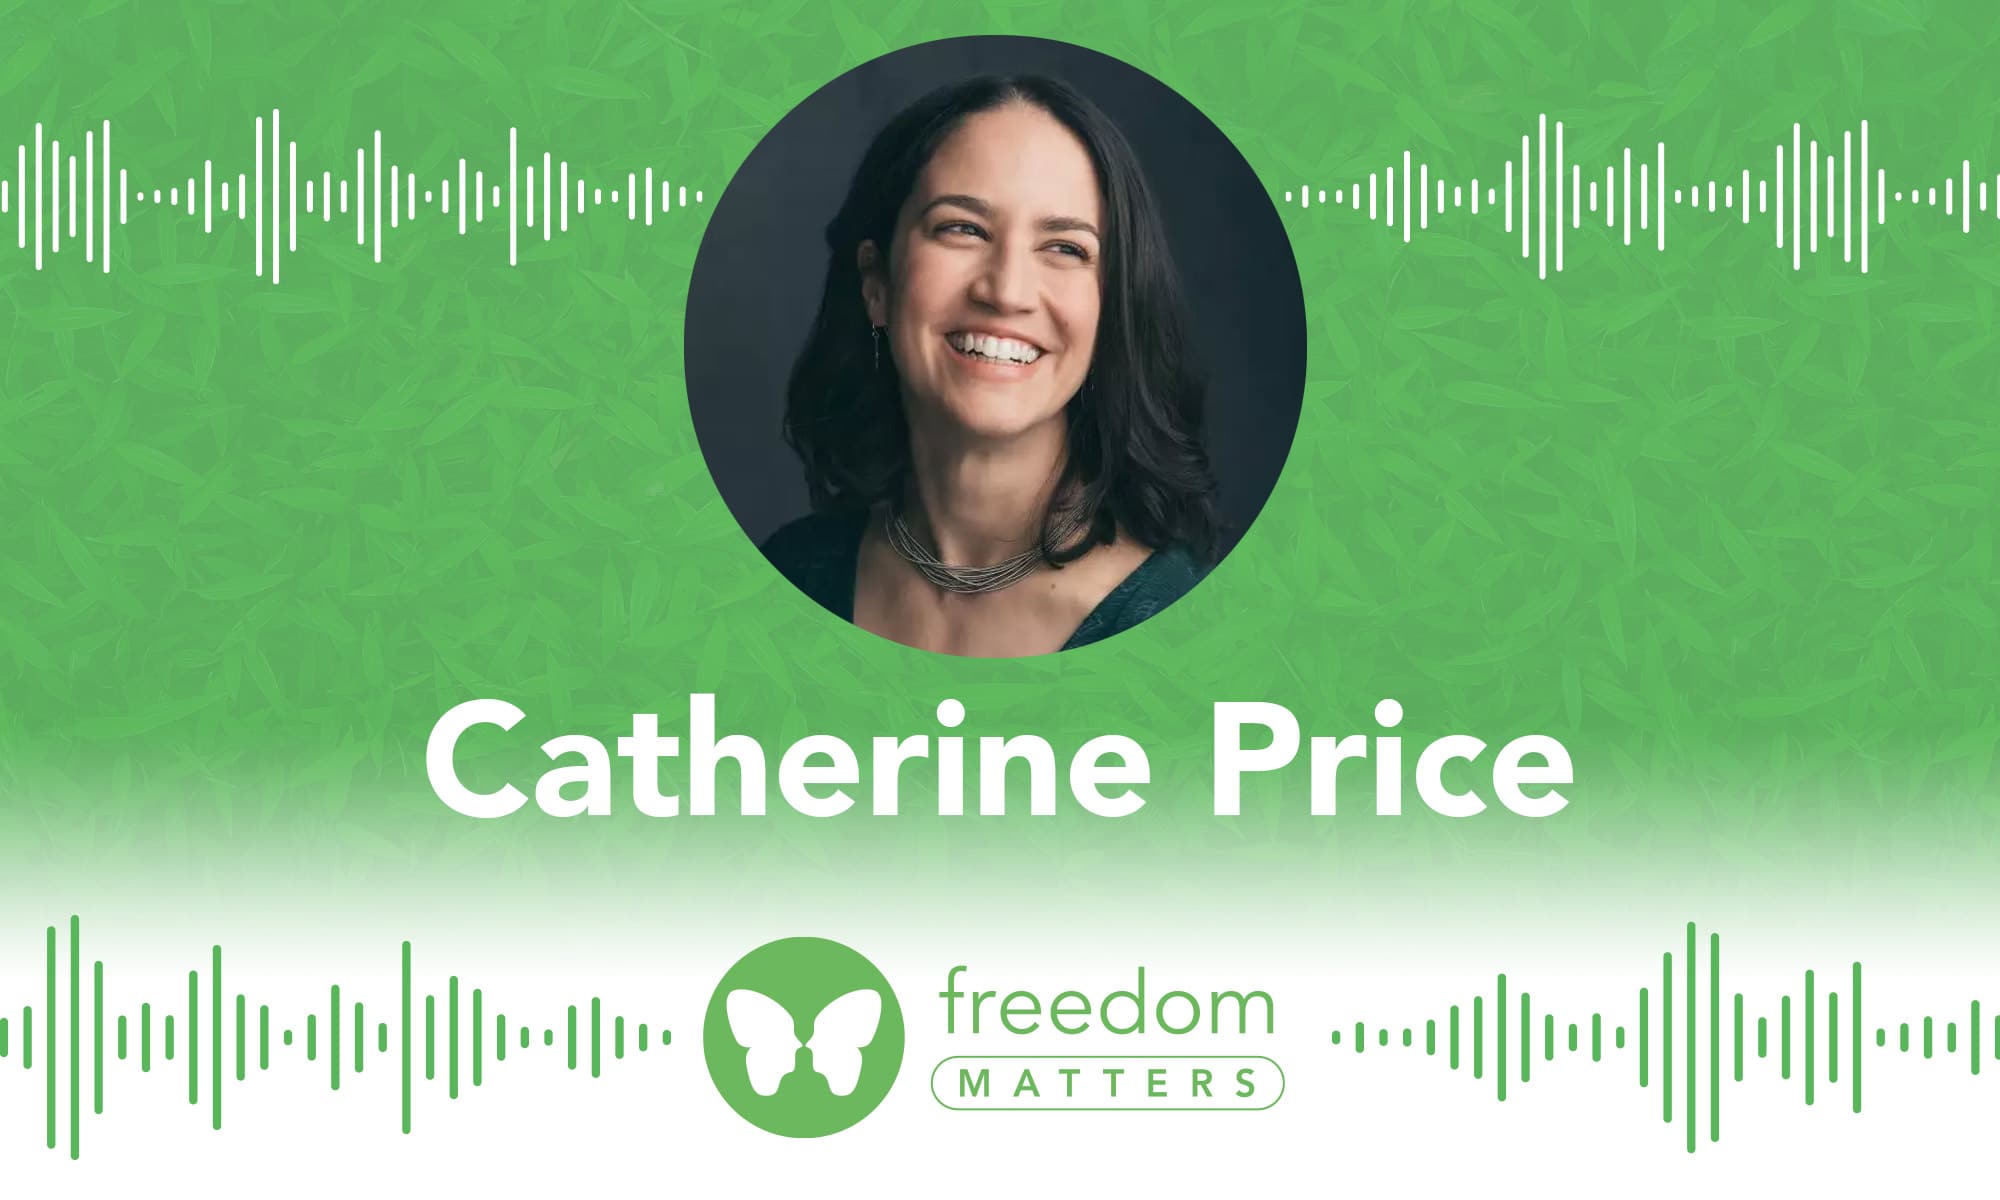 Catherine Price Freedom Matters Podcast the power of fun